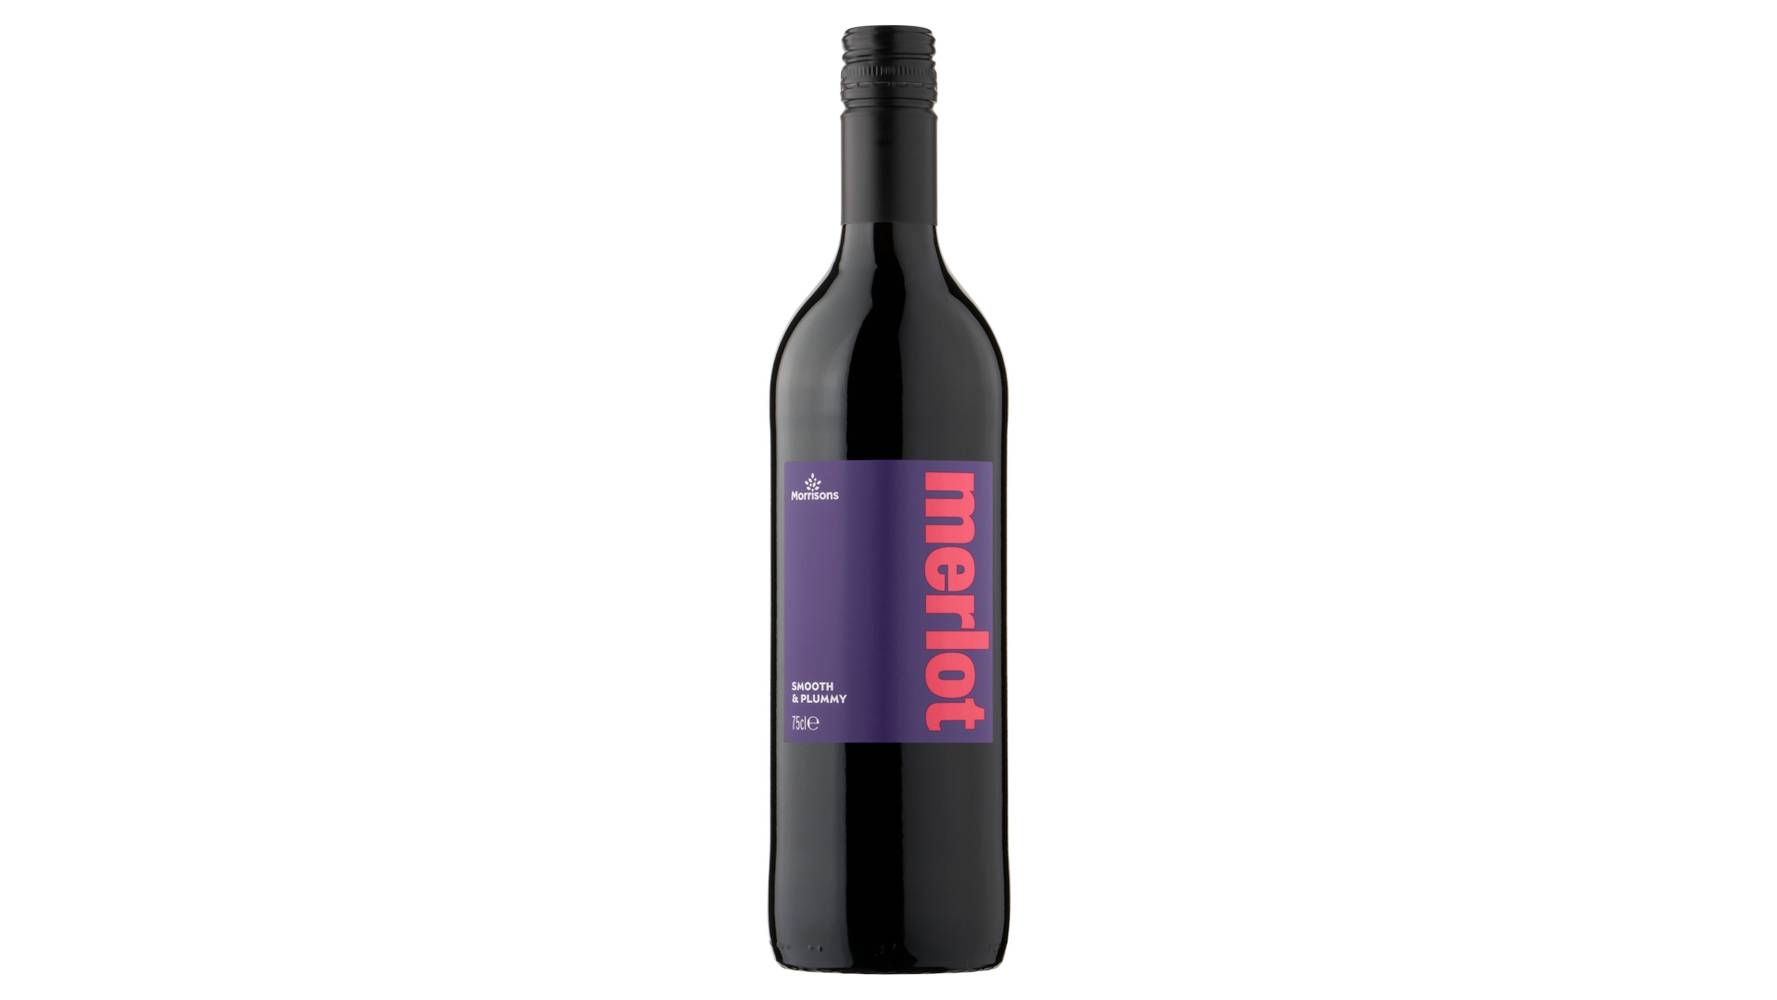 Morrisons Smooth and Plummy Merlot Red Wine (750 ml)